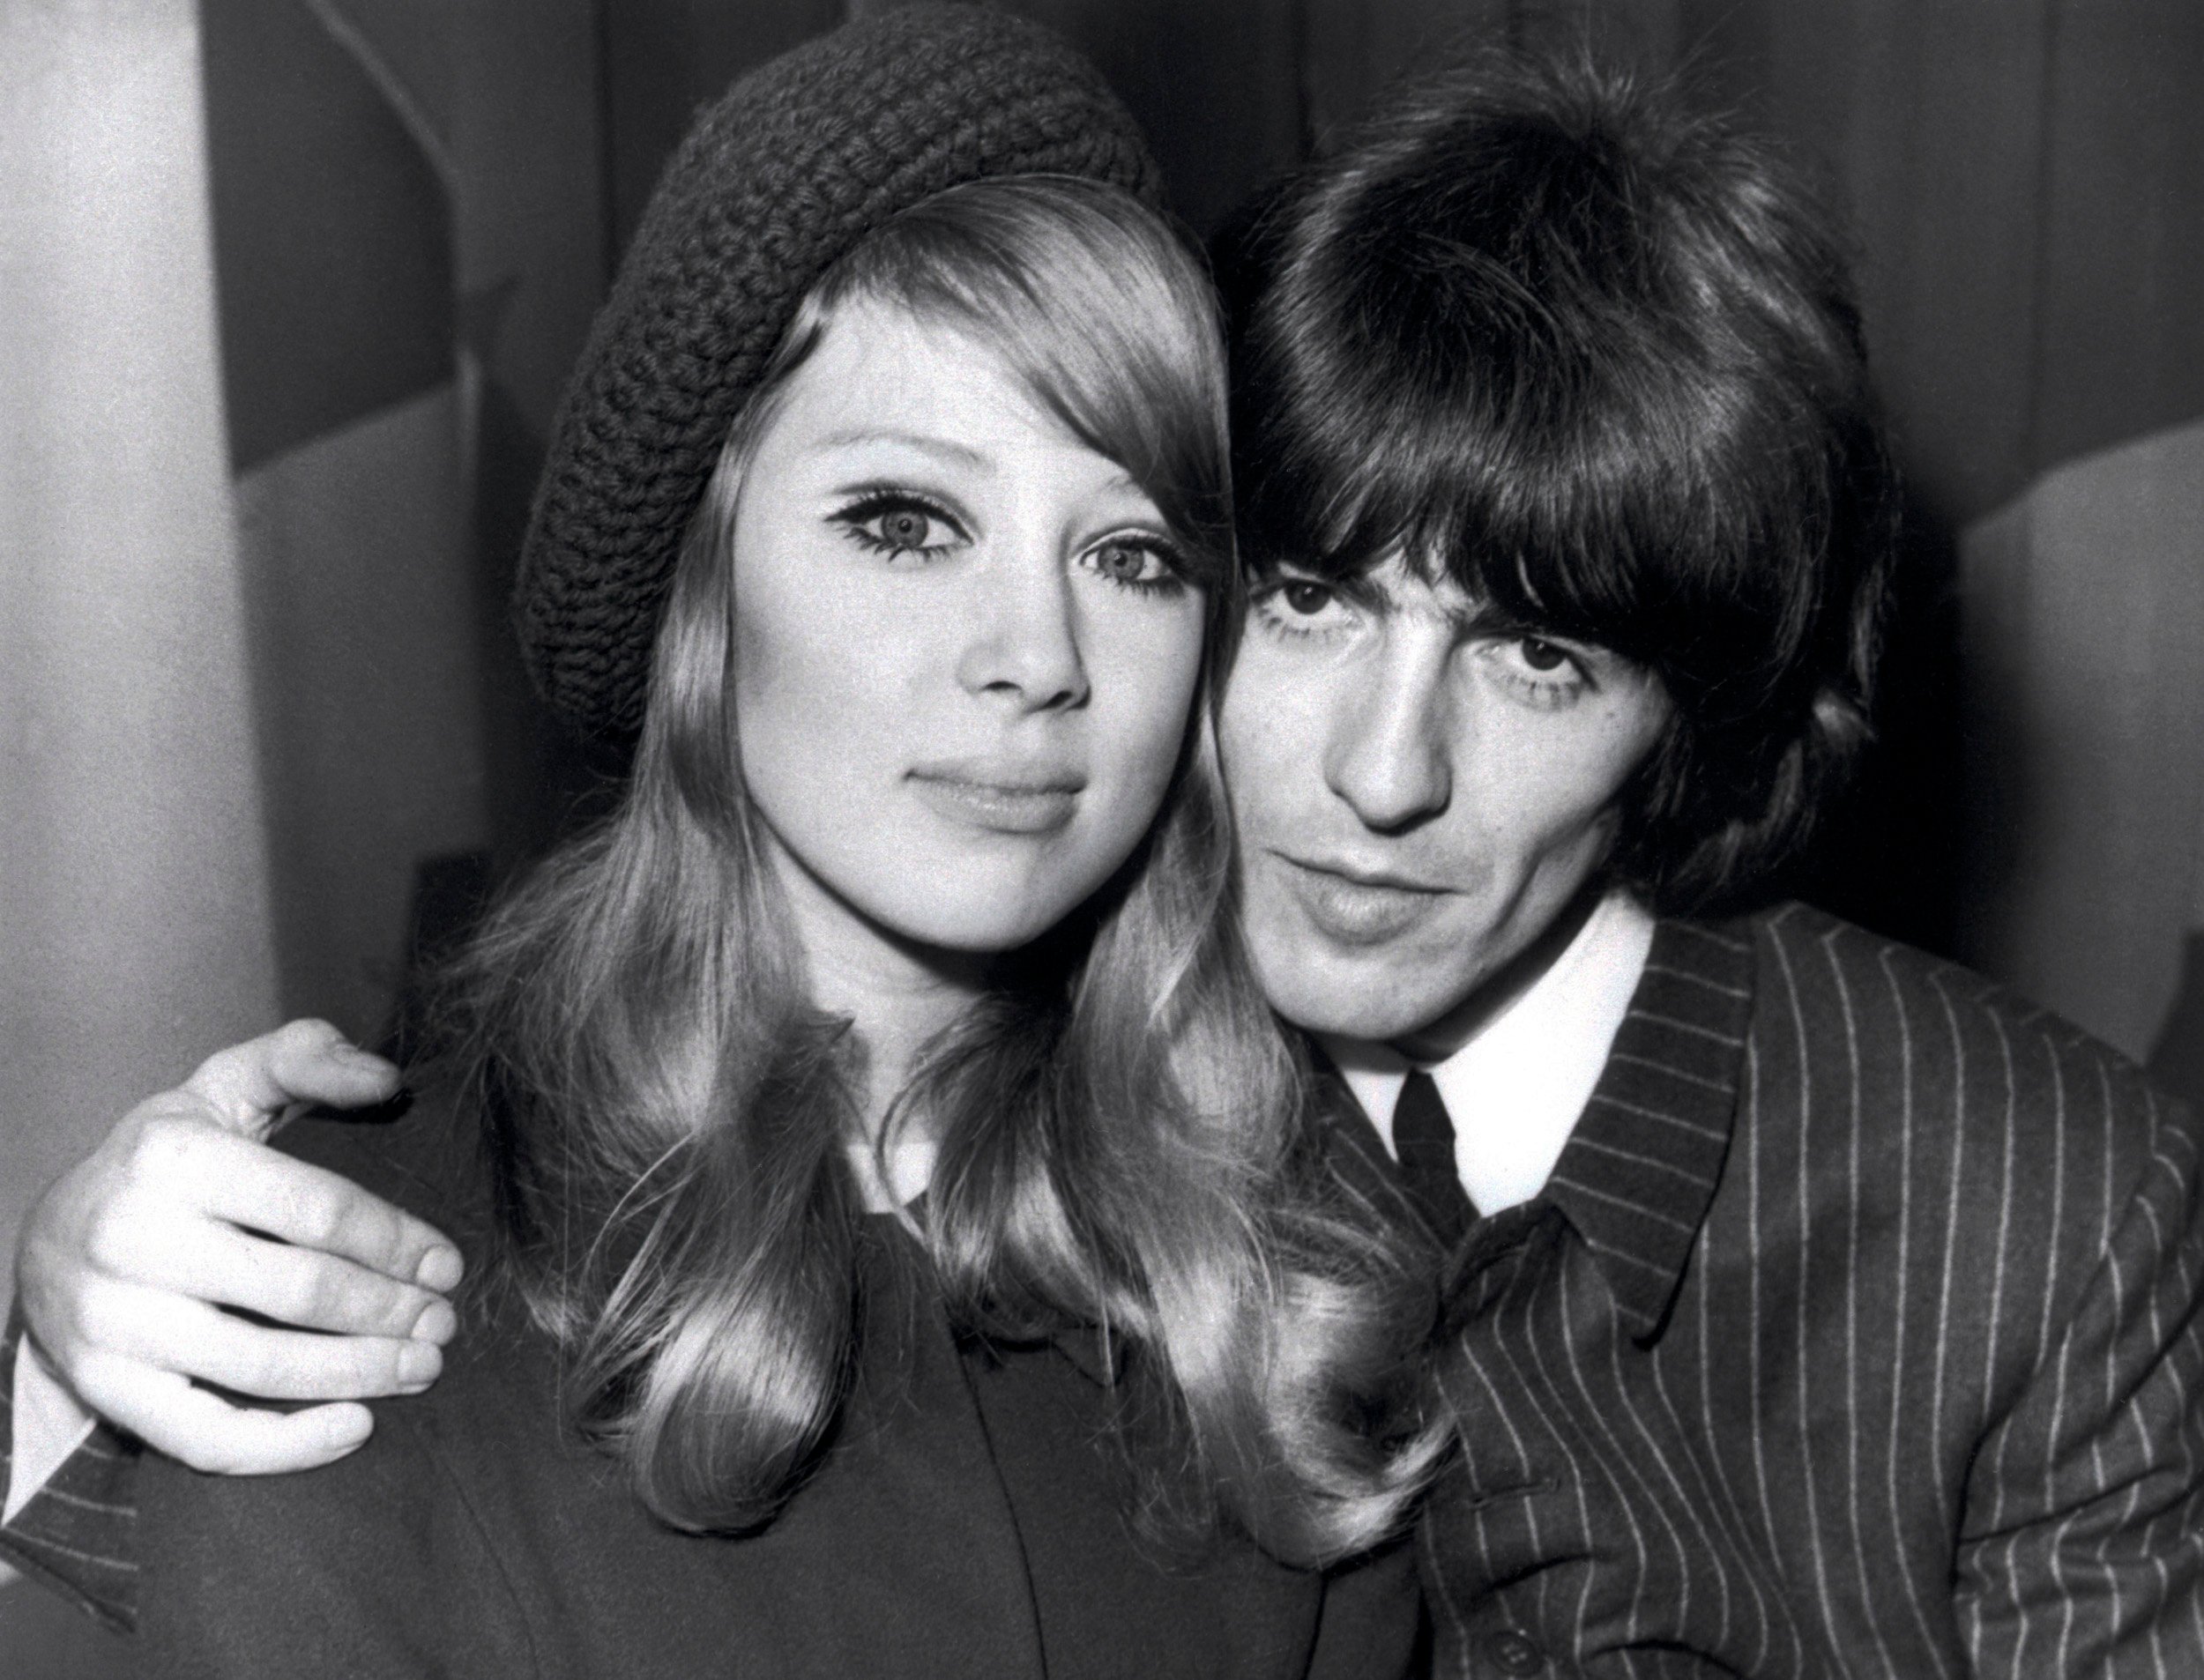 A black and white picture of George Harrison with his arm around Pattie Boyd.